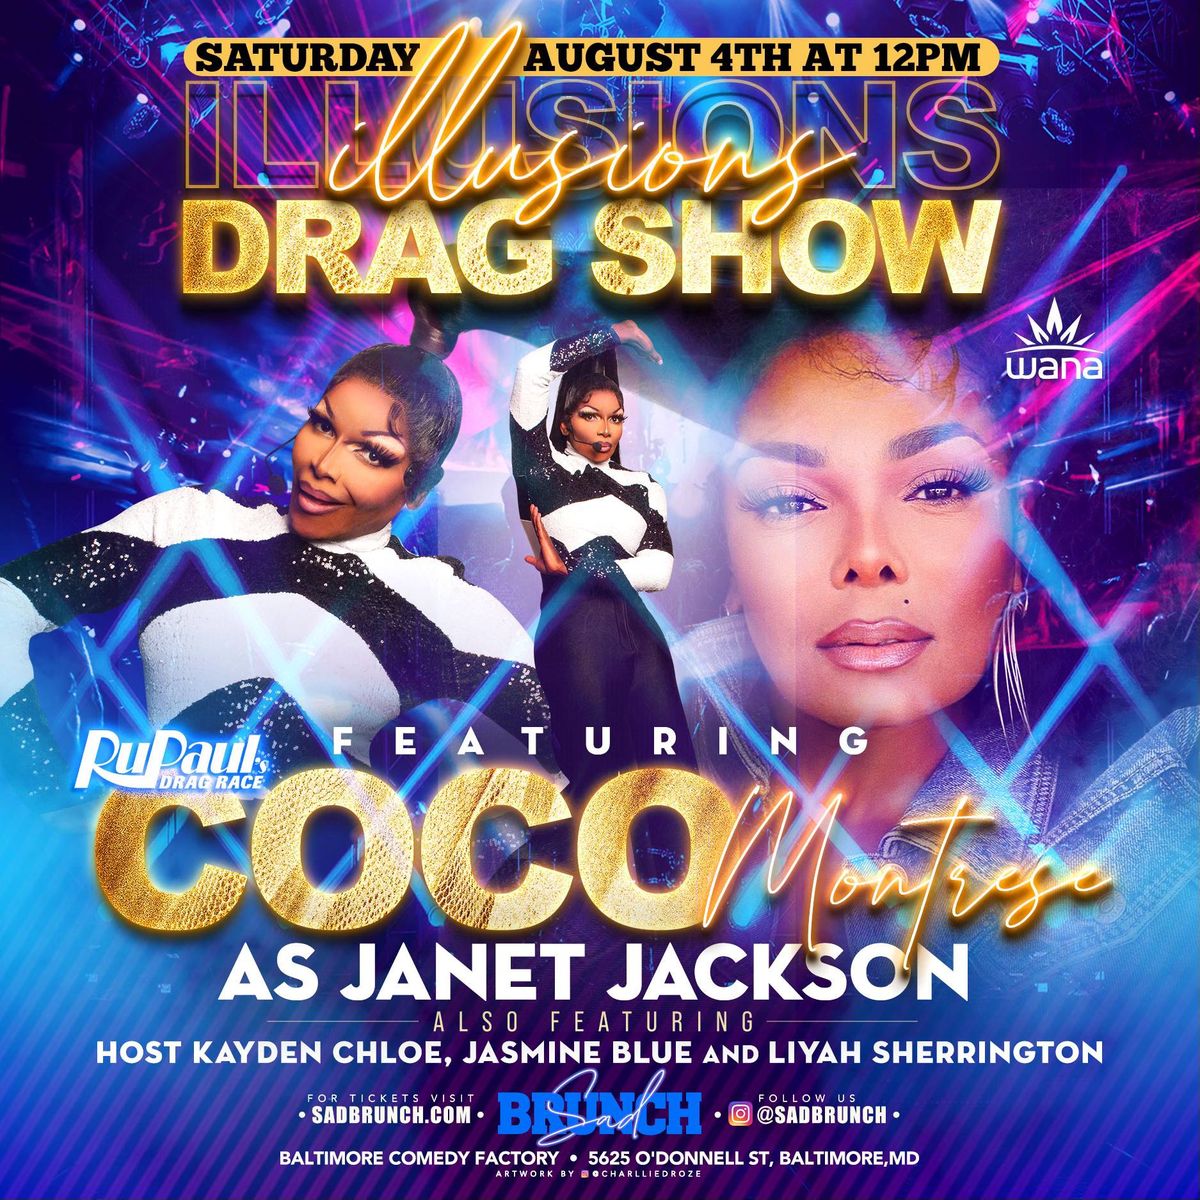 ILLUSIONS Drag Brunch feat. Vegas star Coco Montrese!